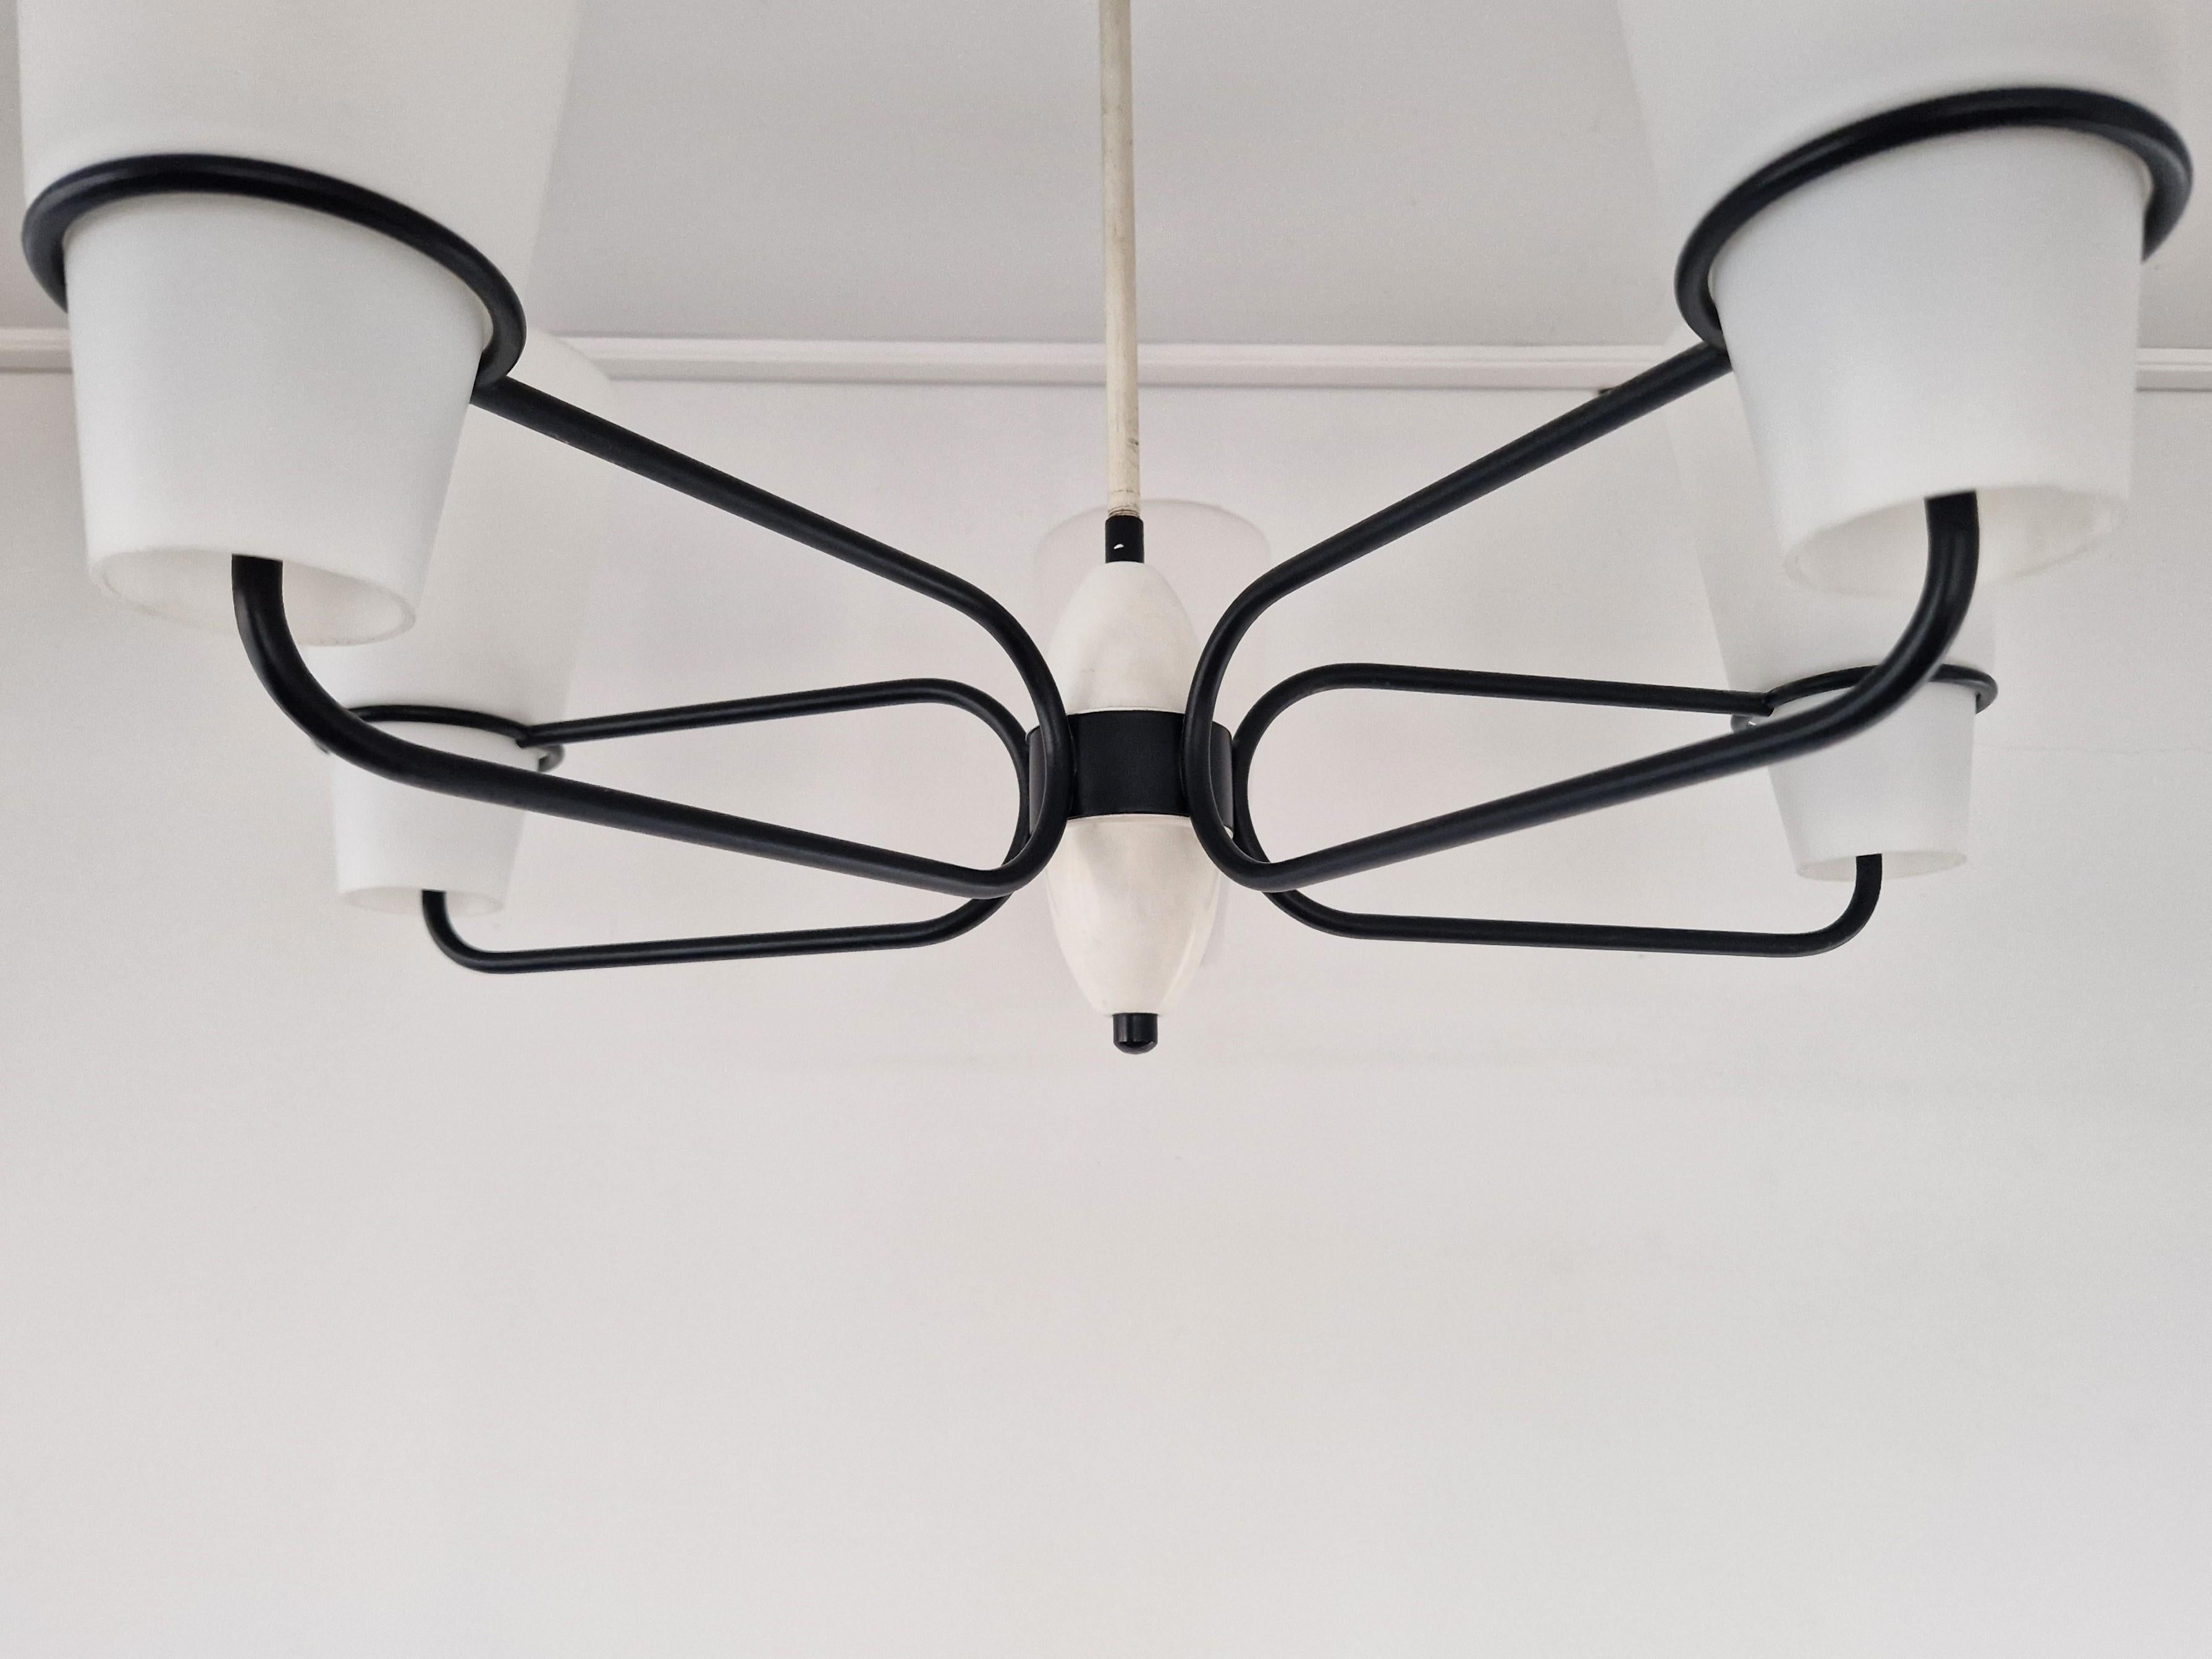 European Vintage black and white 5-armed chandelier, 1950's/1960's